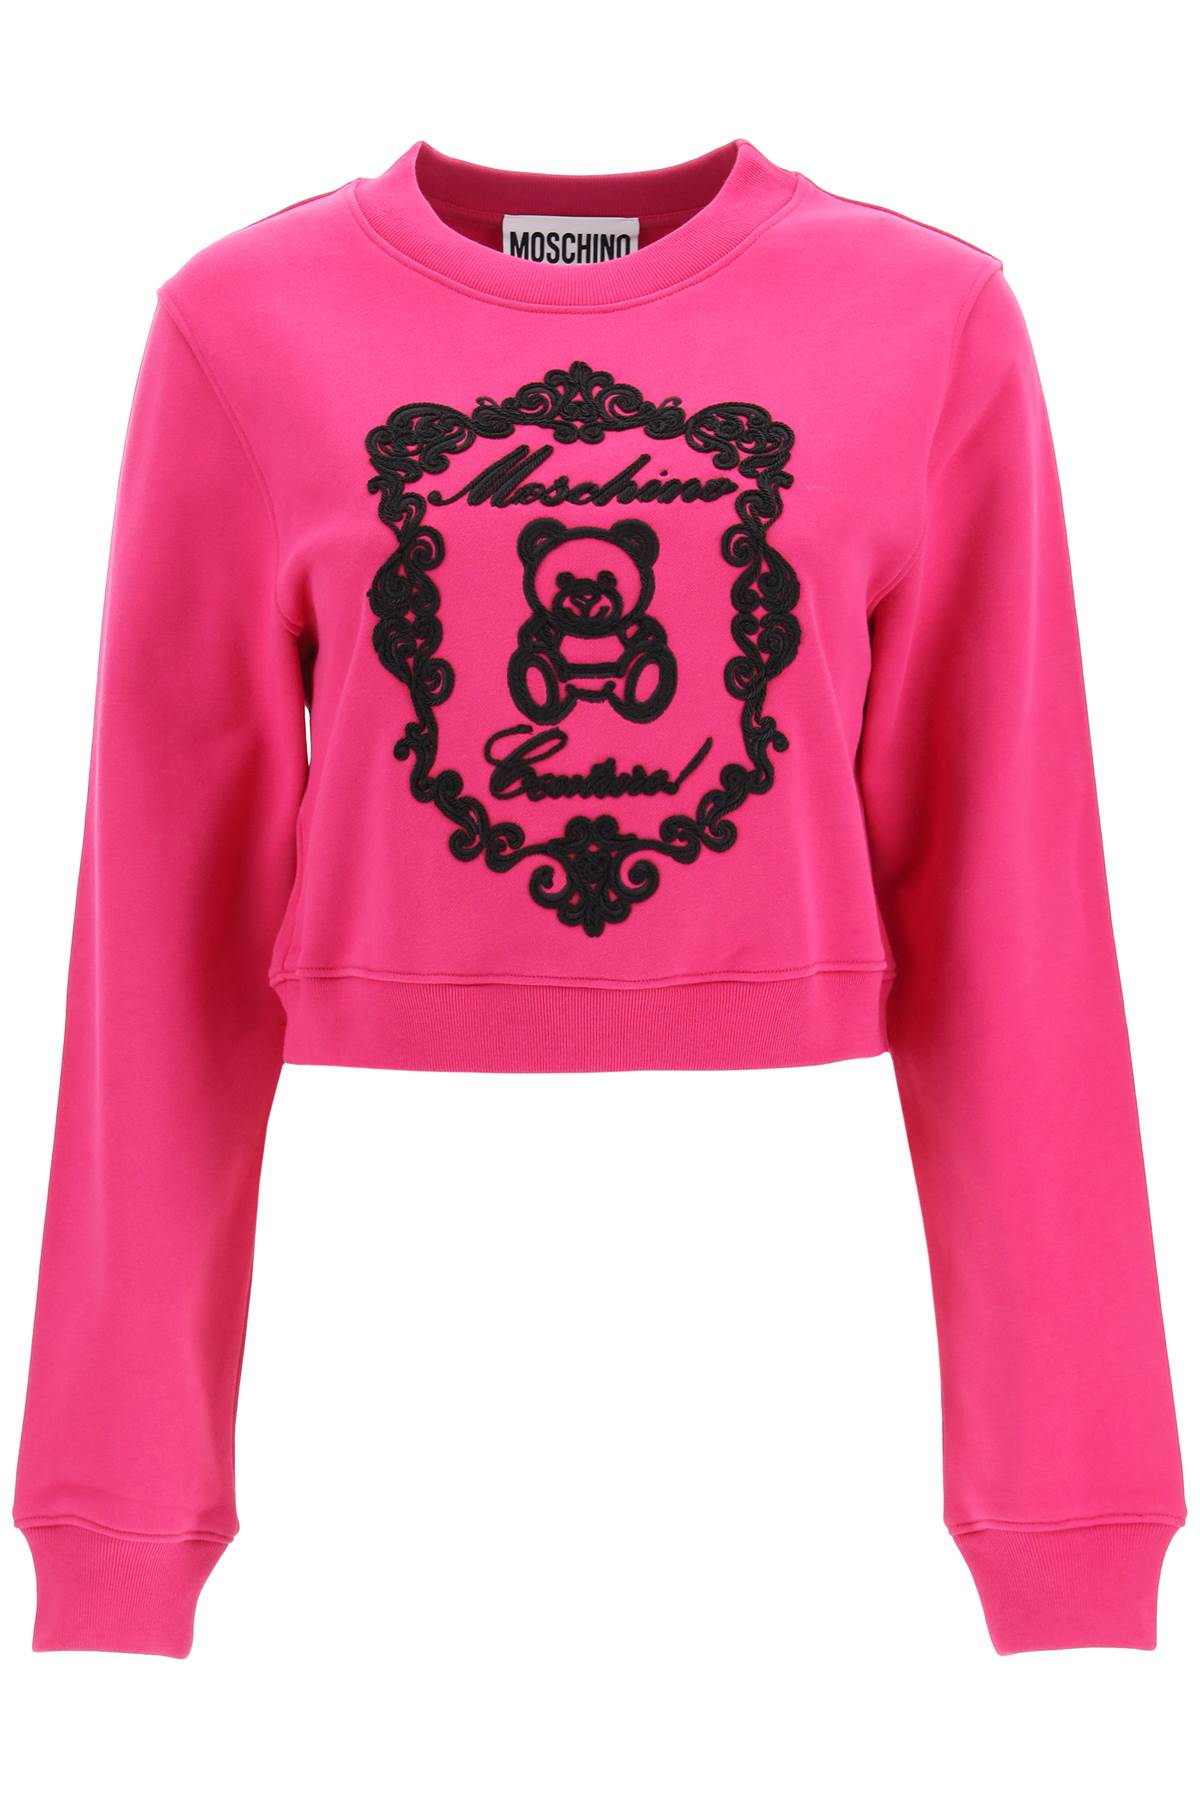 Moschino Teddy Bear cropped hoodie - Pink